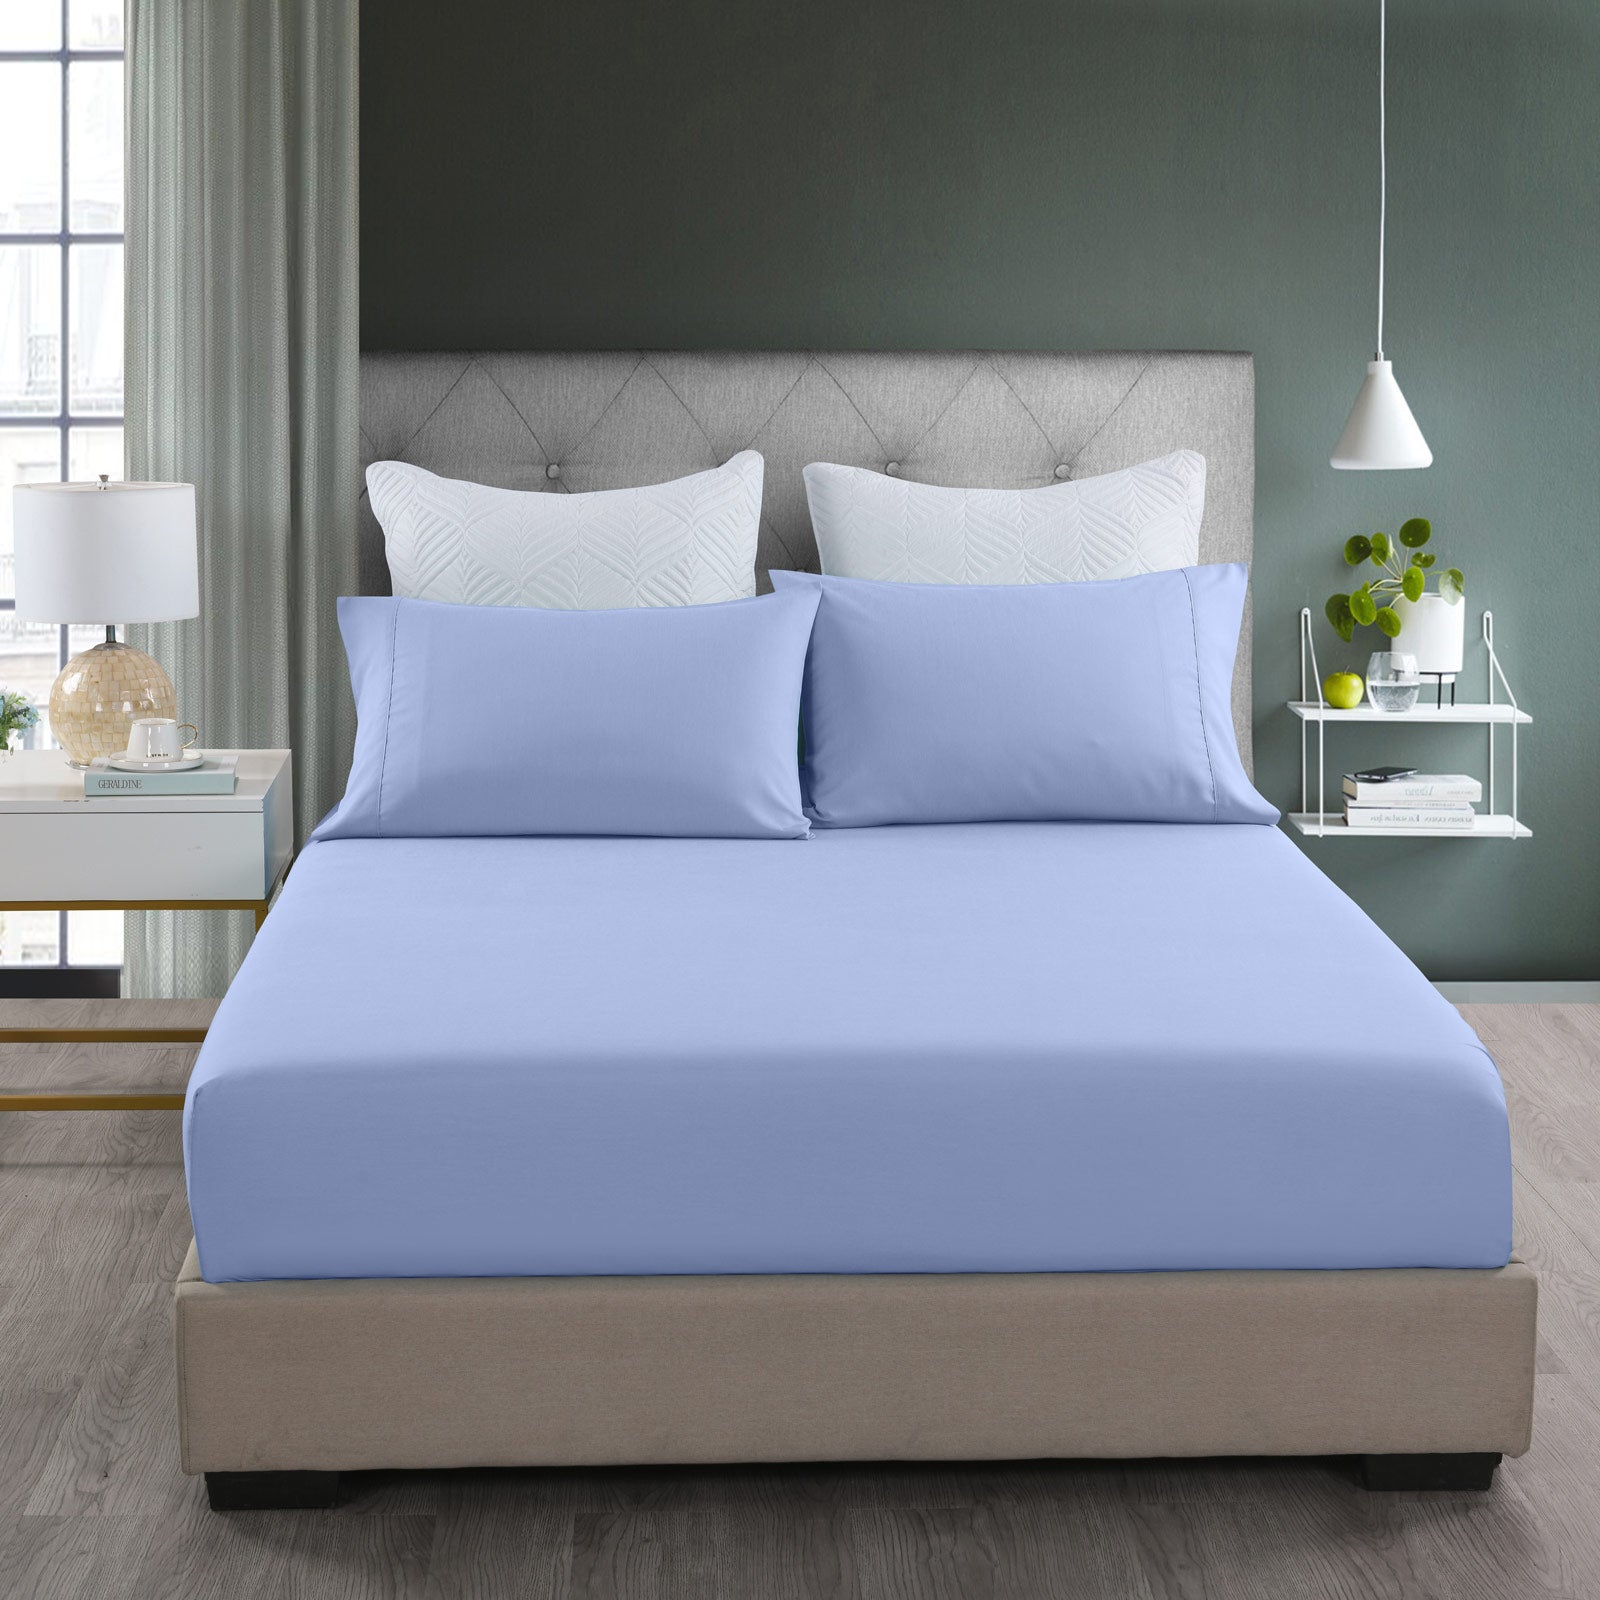 Royal Comfort 2000TC 3 Piece Fitted Sheet and Pillowcase Set Bamboo Cooling - Double - Light Blue from Deals499 at Deals499